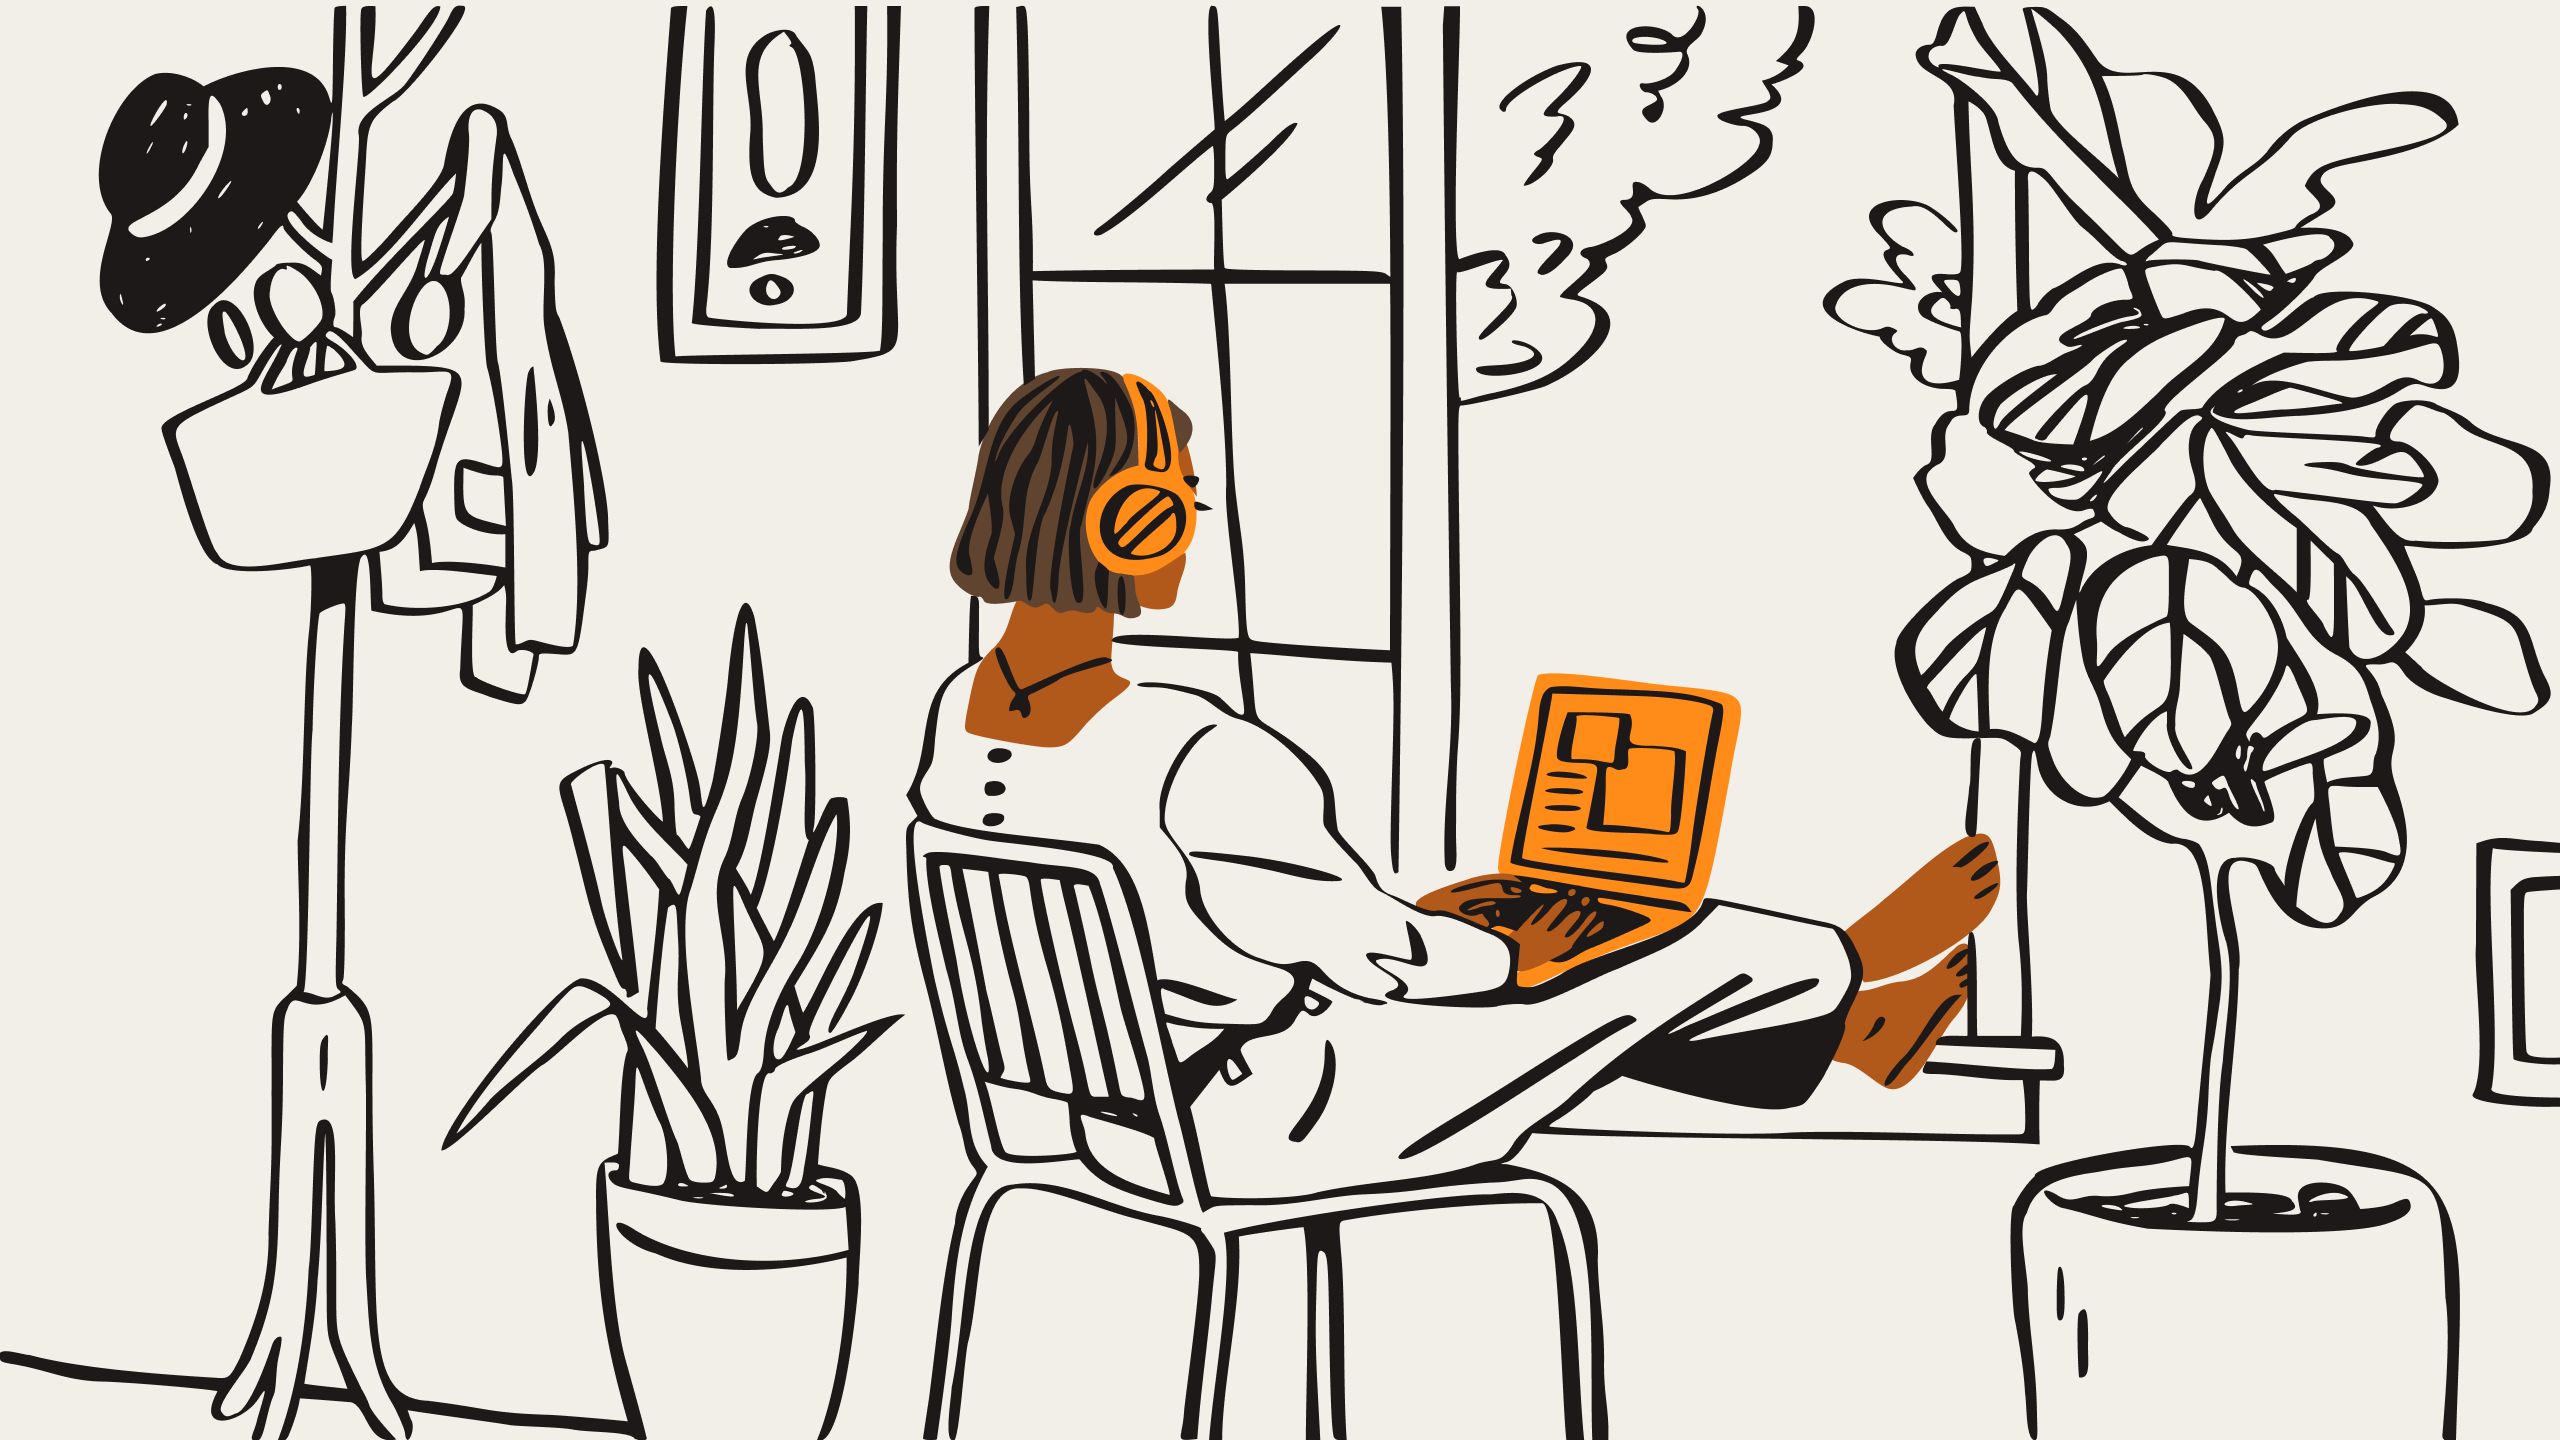 An illustration of a person wearing orange headphones, sitting in a chair, looking at an orange laptop